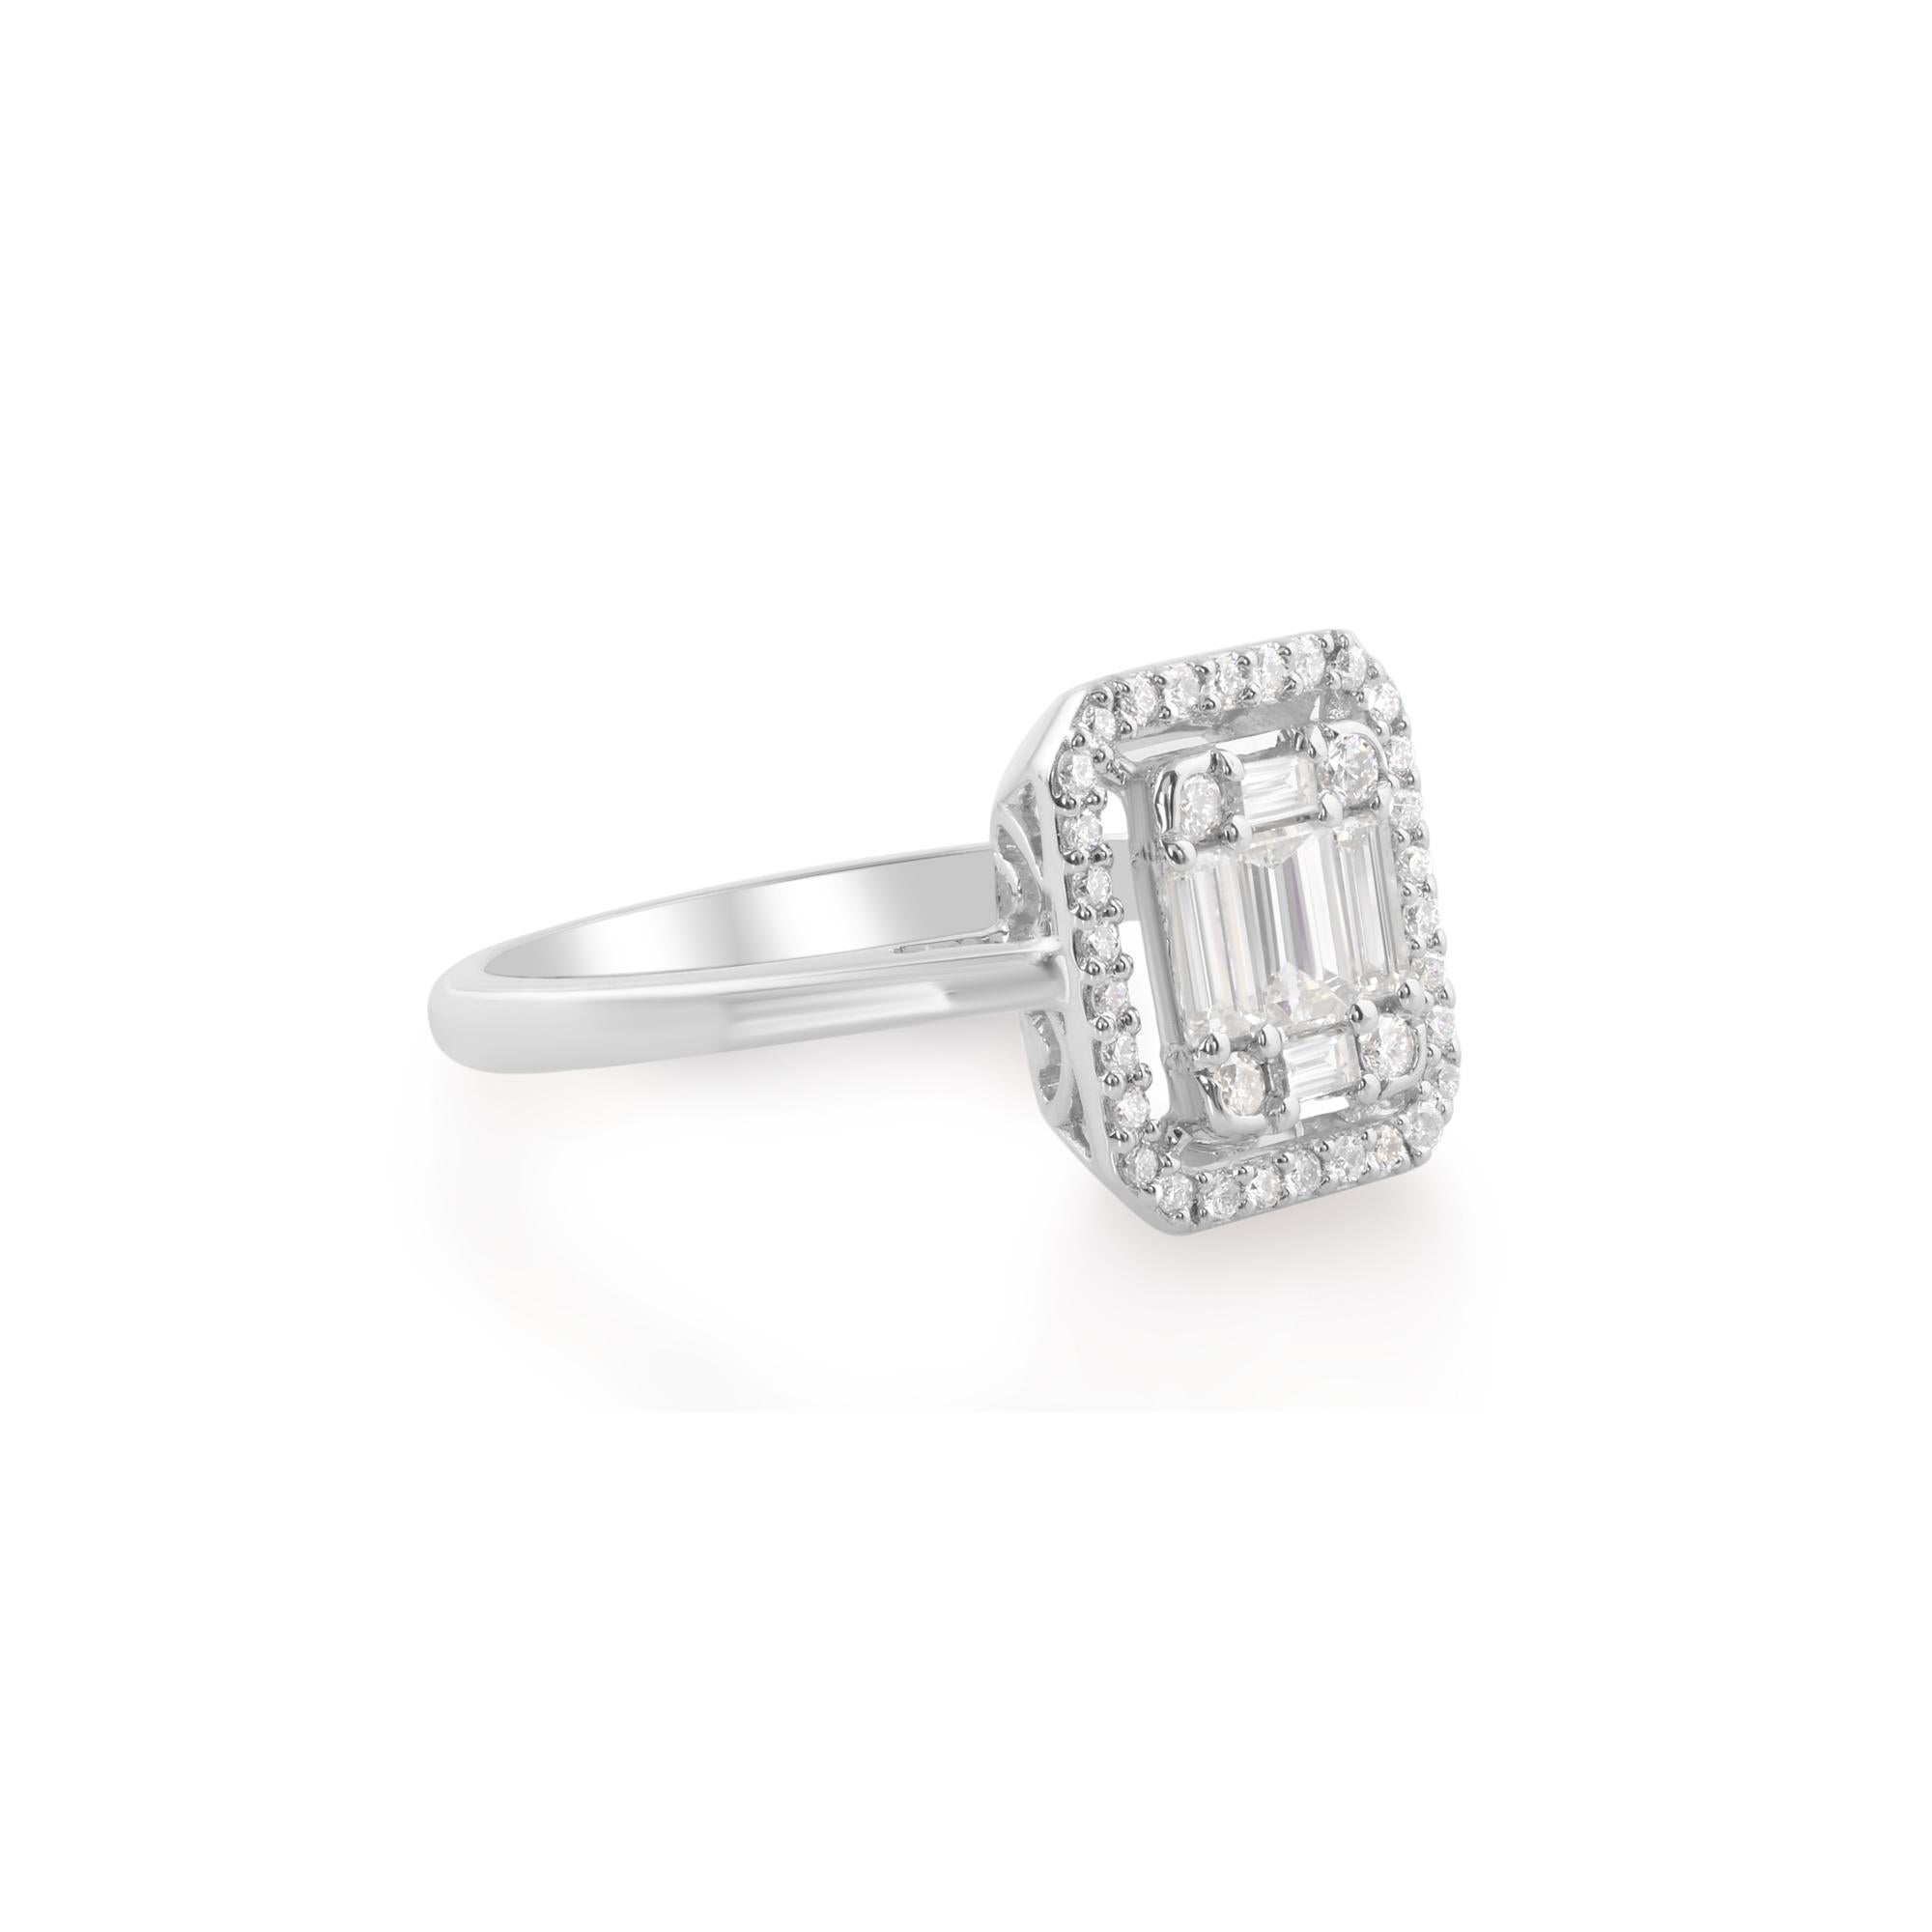 The central baguette diamond is the epitome of elegance, radiating brilliance and sophistication with its elongated shape and exceptional clarity. Its mesmerizing beauty is enhanced by the pristine white gold setting, which complements the diamond's